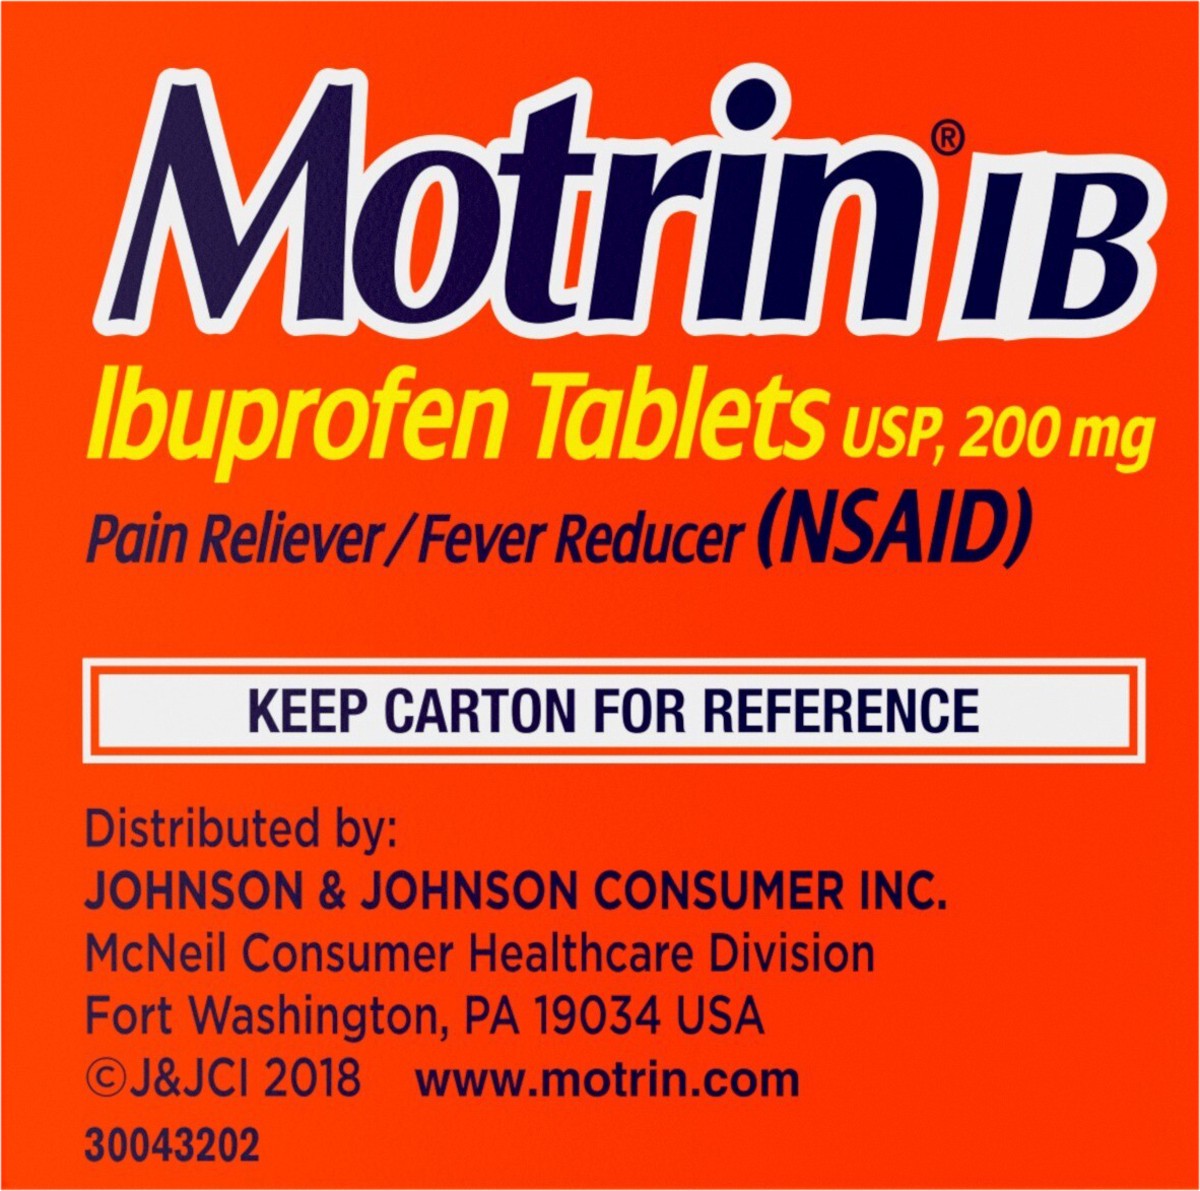 slide 6 of 7, Motrin IB Pain Reliever & Fever Reducer Caplets - Ibuprofen (NSAID), 50 ct